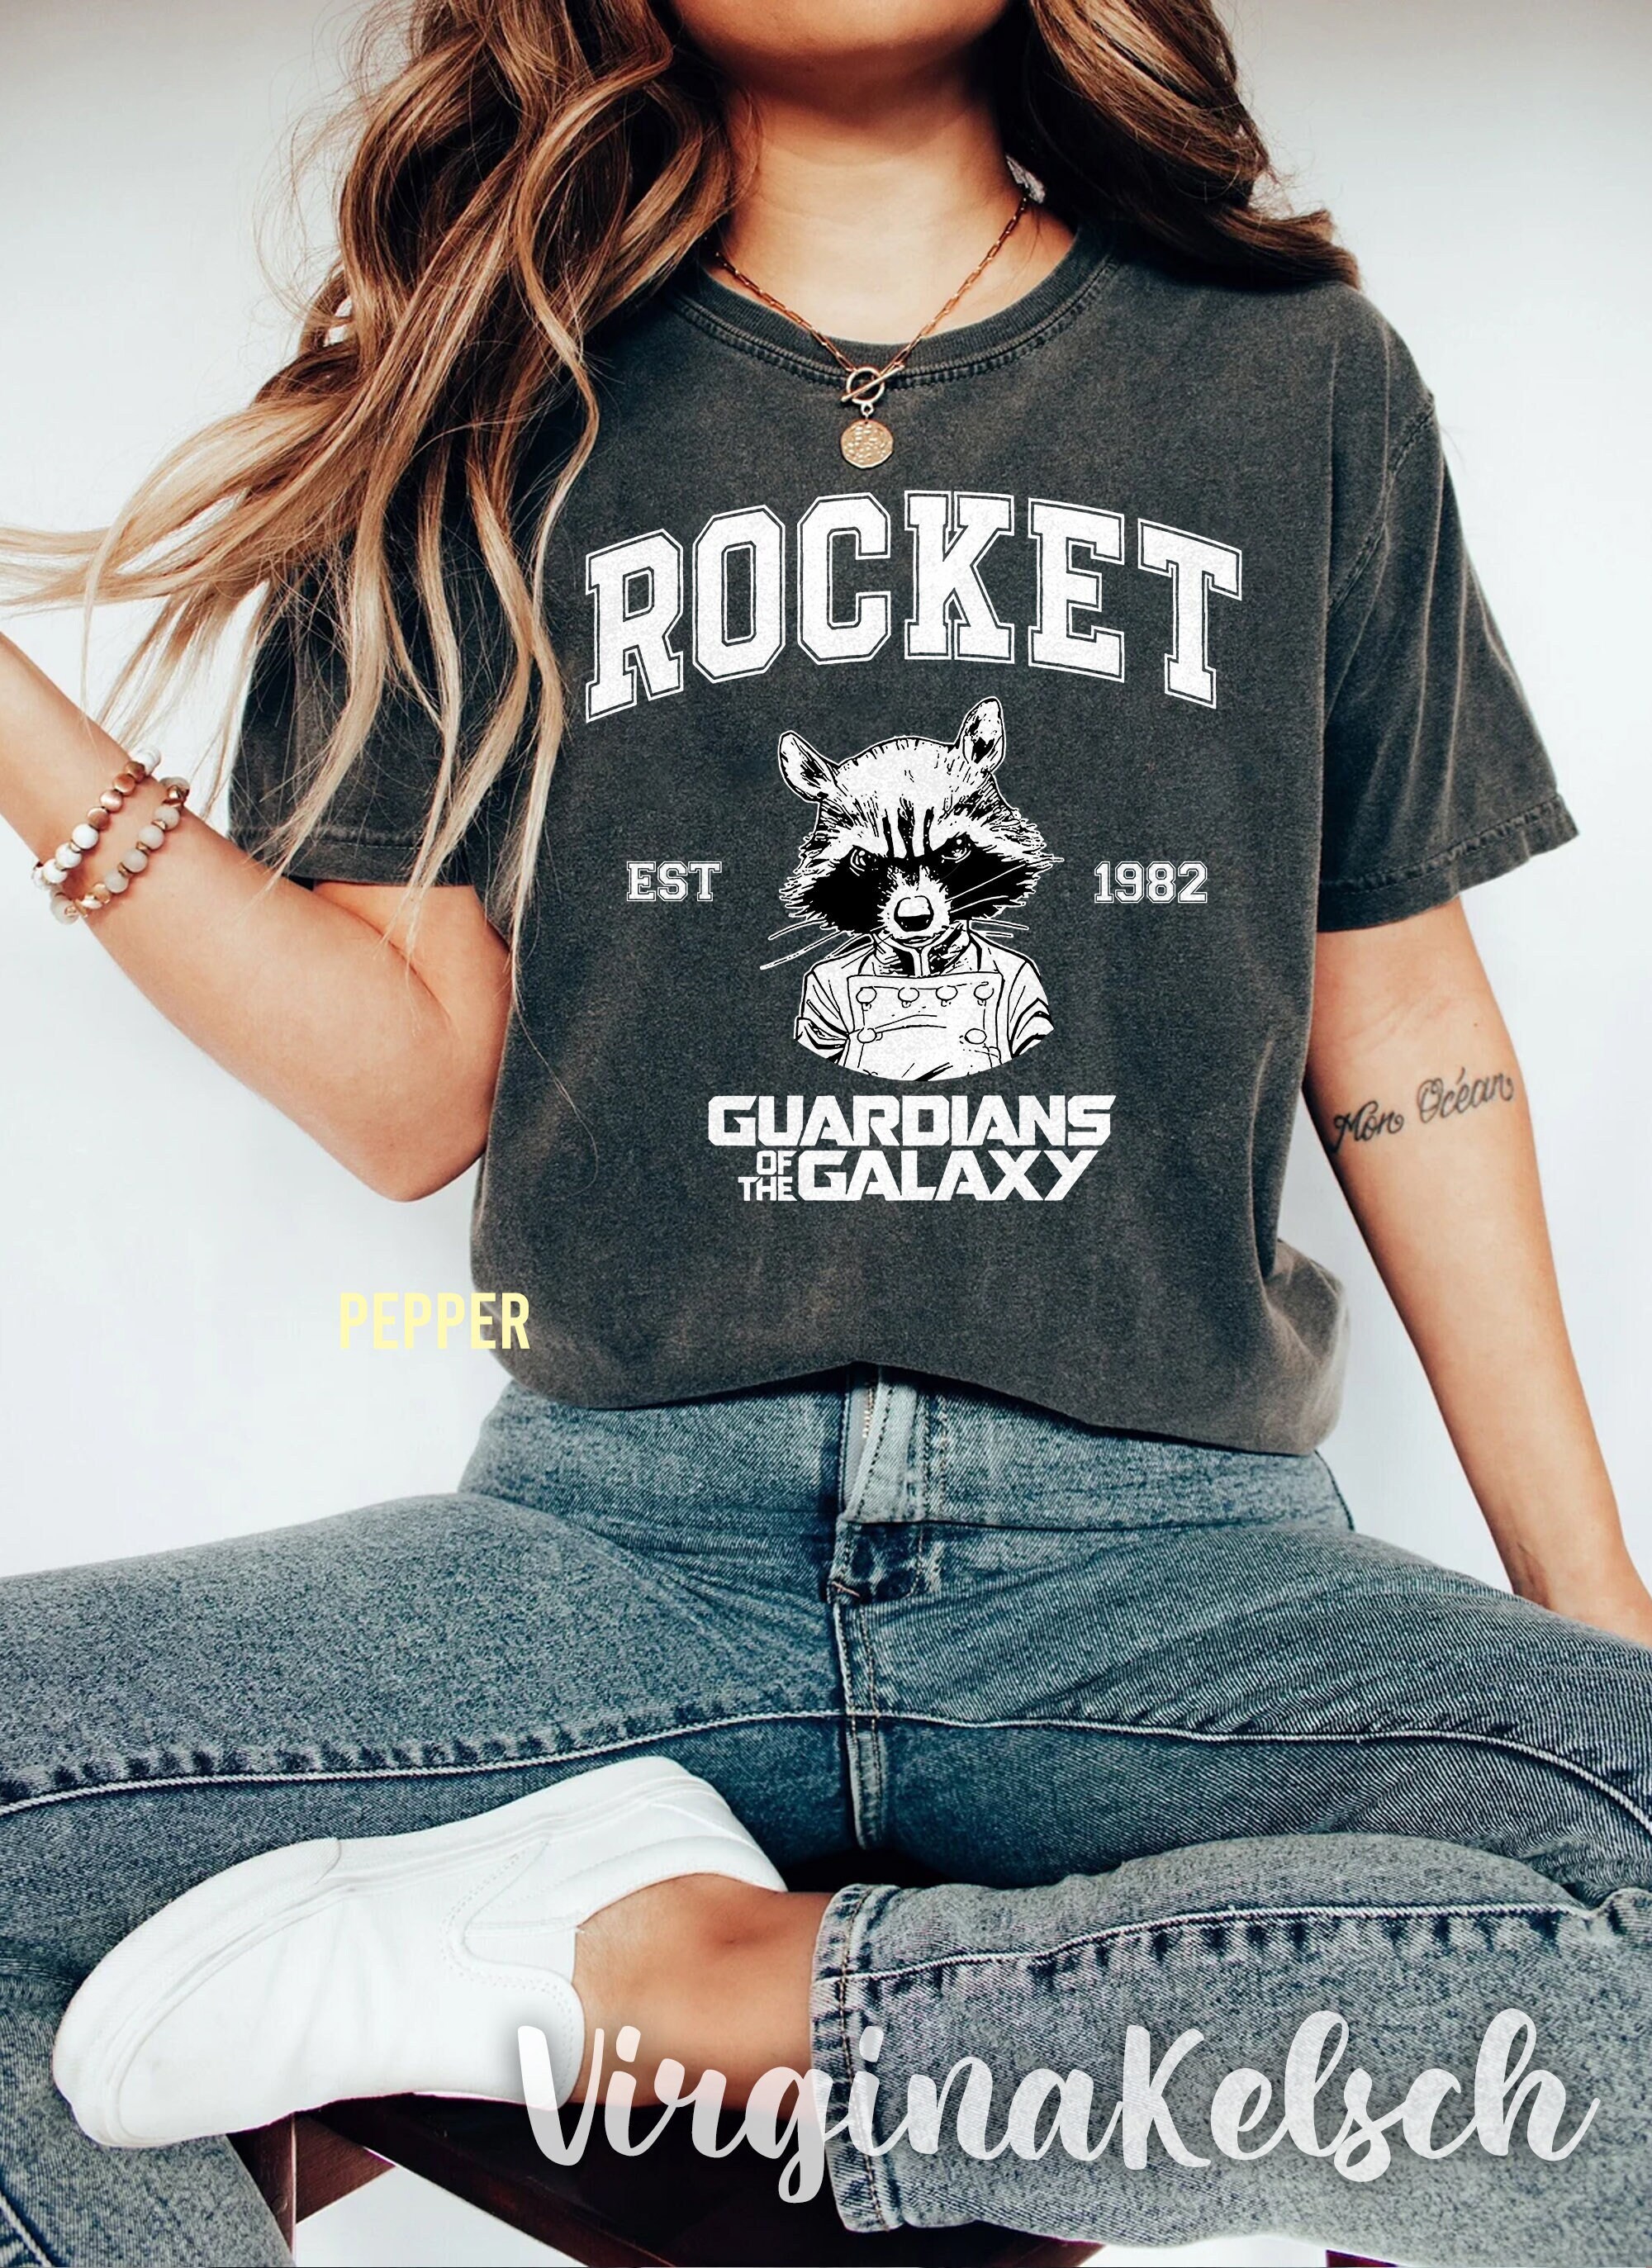 Hello Accessories TR Planet Line Drawing Sweatshirt, Customizable Galaxy Pocket Tees, Personalized Gifts, Unisex Graphic Tees, Simple Planets Pocket Shirt